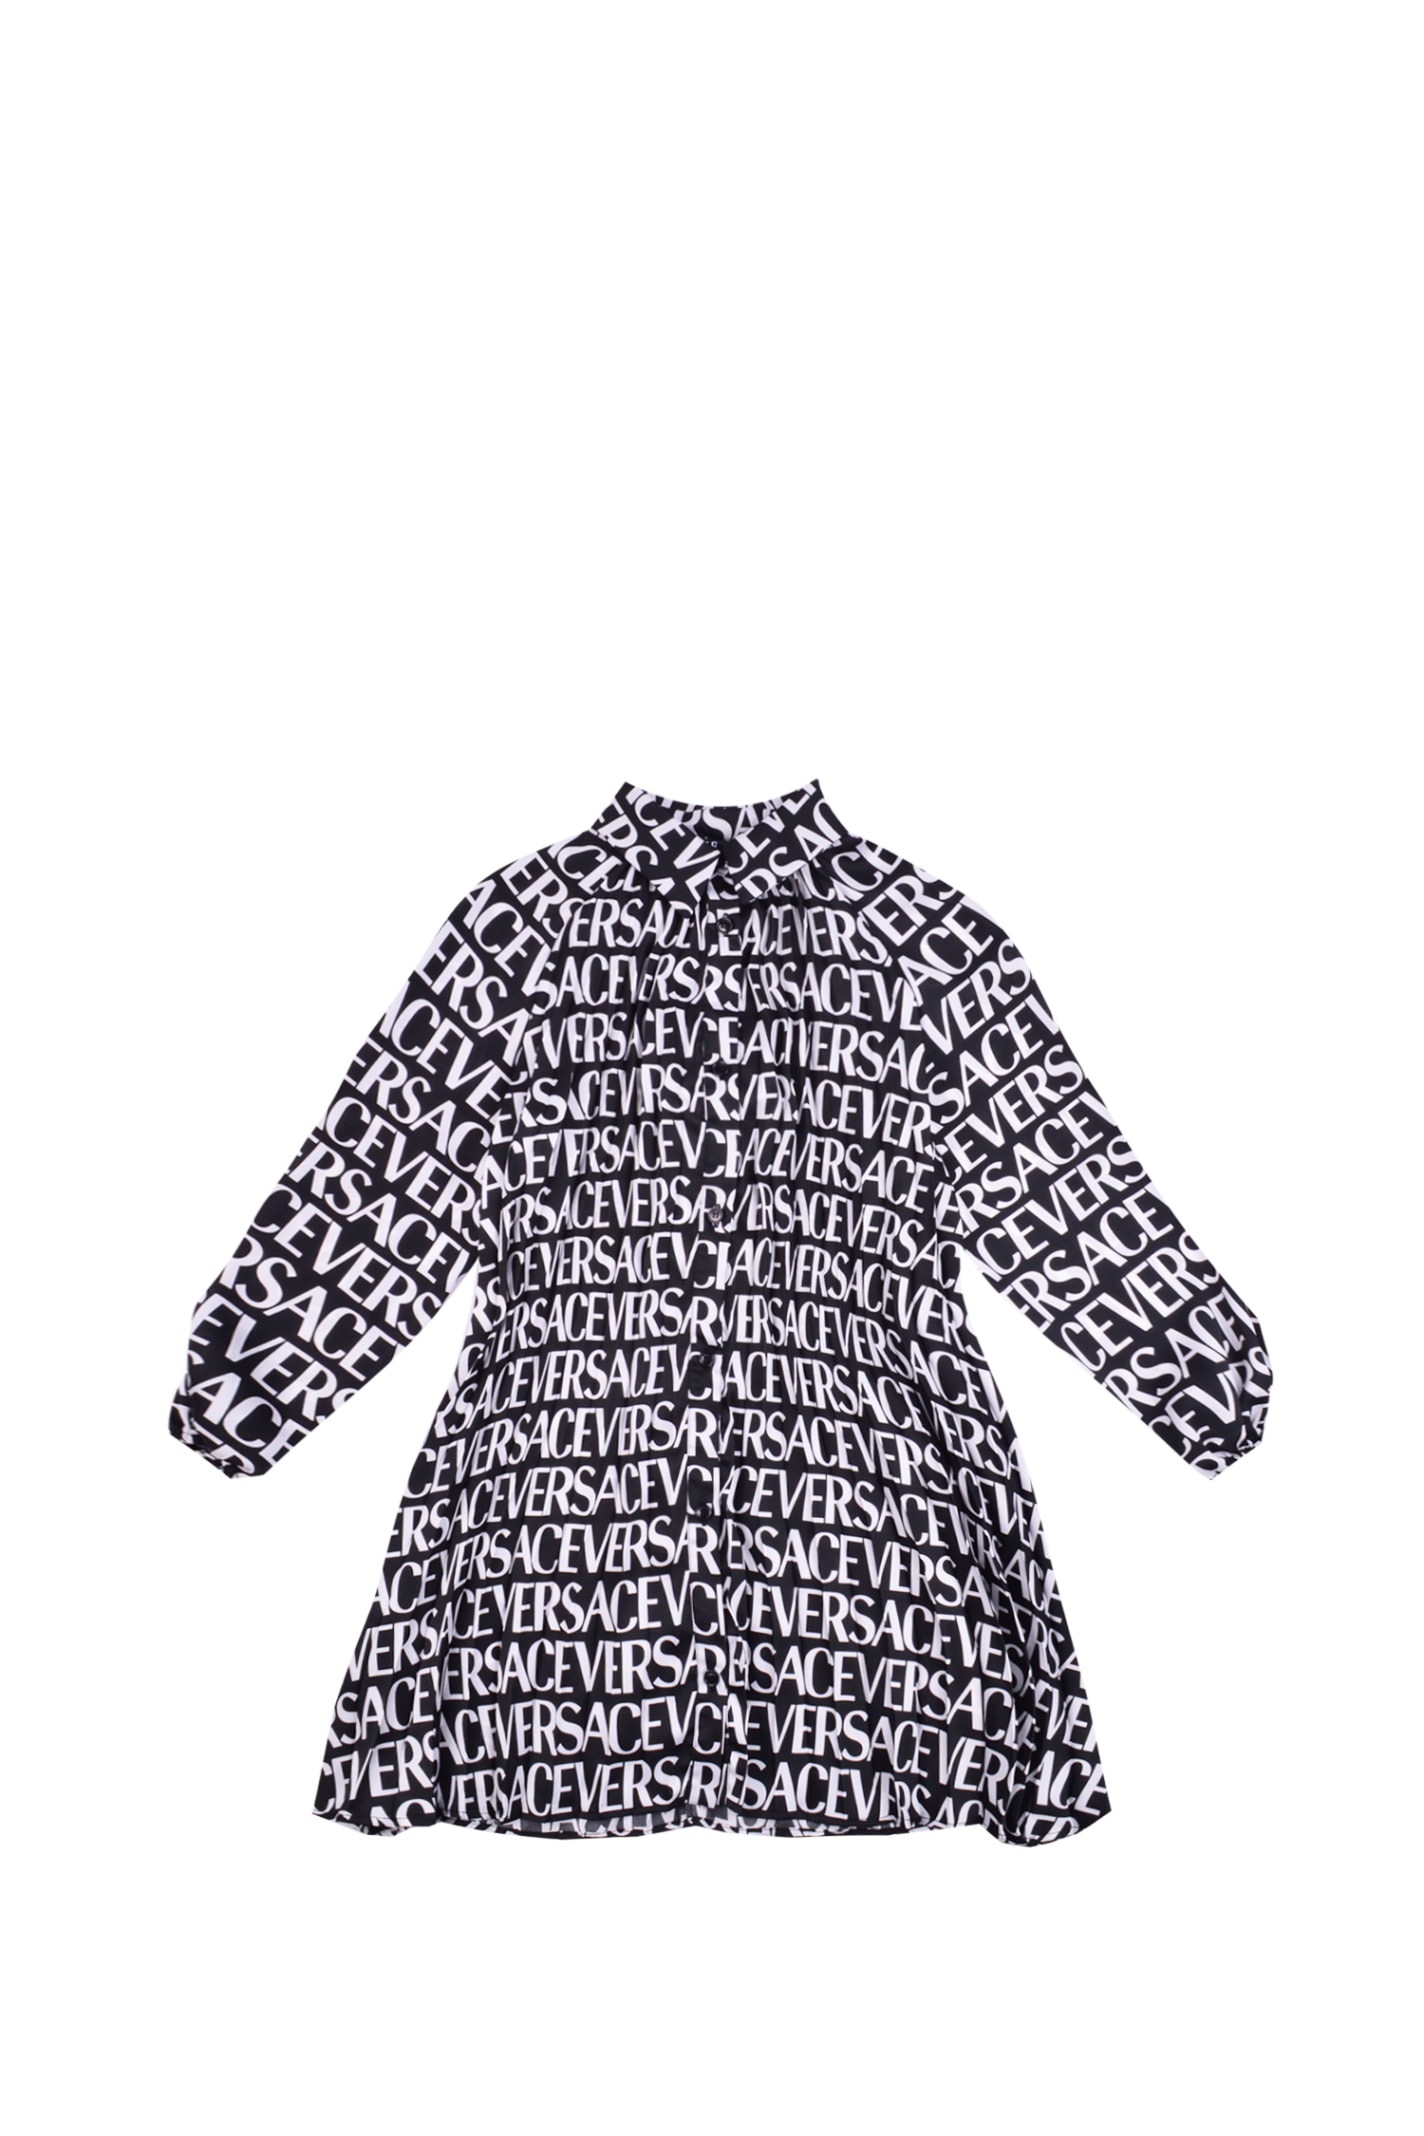 Versace Polyester Dress With Print